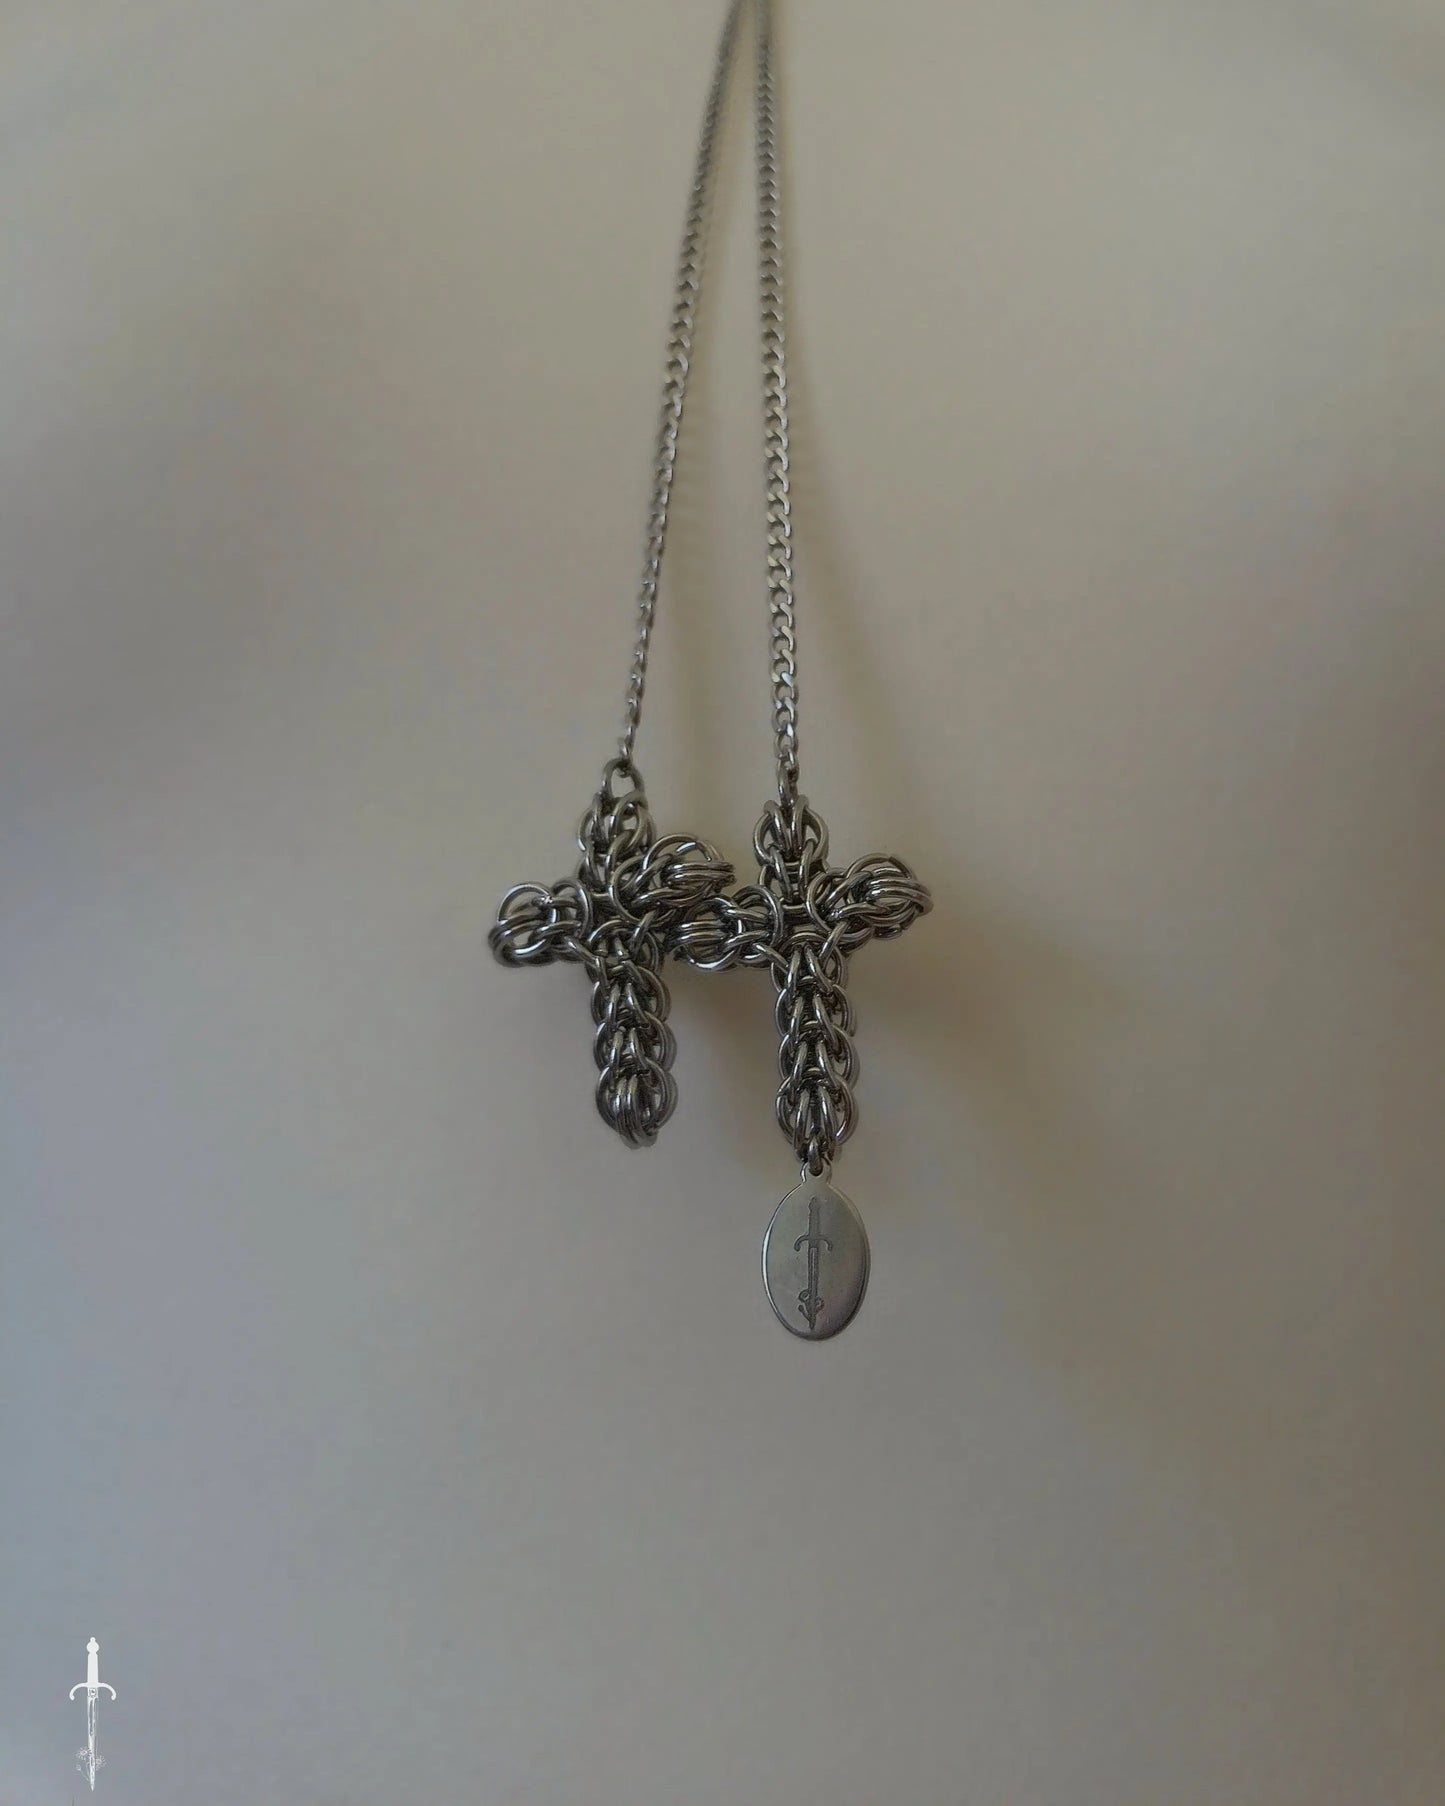 The Trio Cross Bolo Inspired Necklace in Stainless Steel